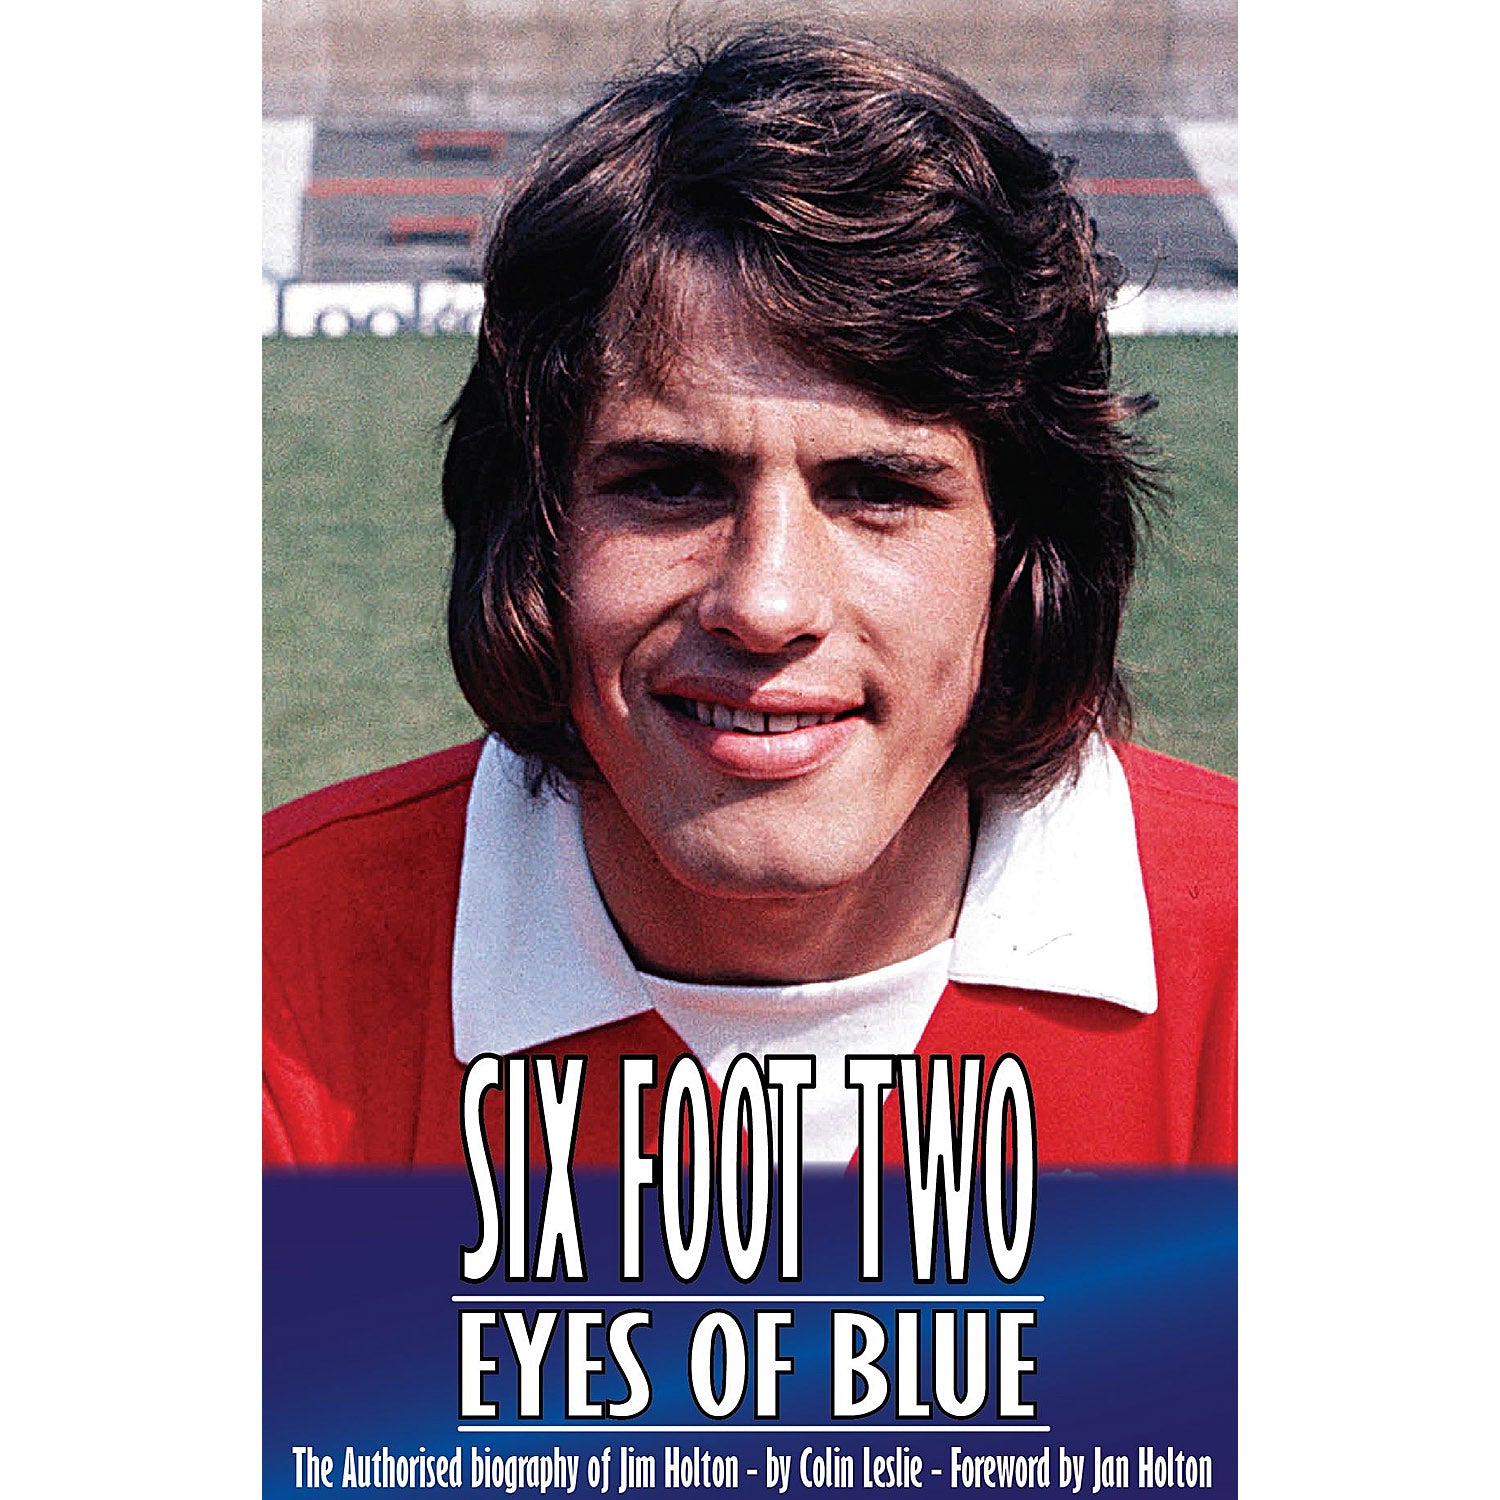 Six Foot Two, Eyes of Blue – The Authorised biography of Jim Holton